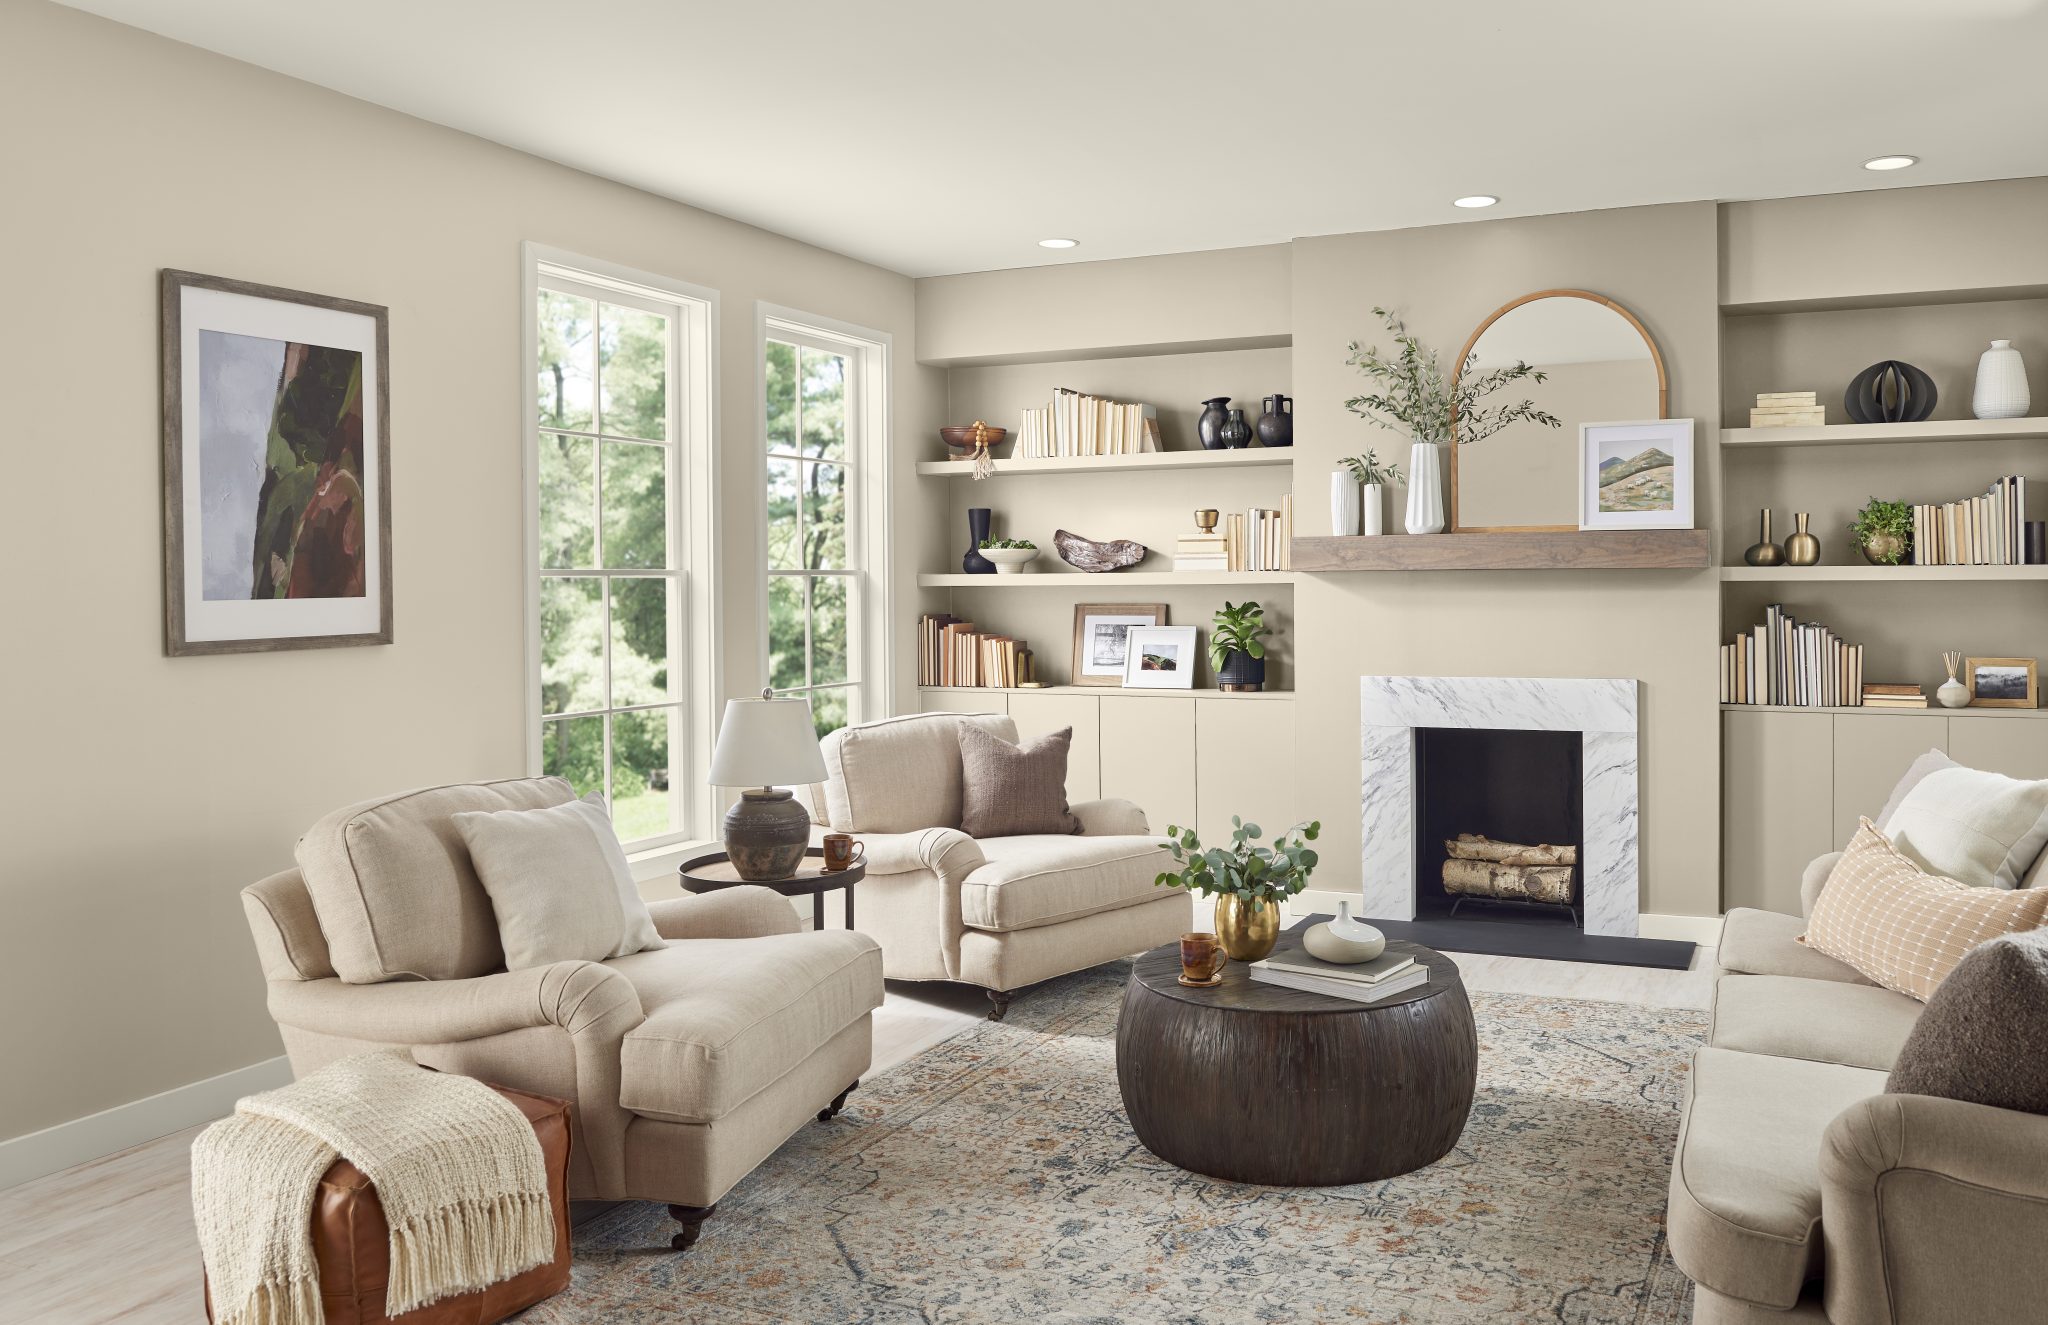 Even-Better-Beige-by-Behr-is-painted-on-the-walls-of-a-beige-living-room.